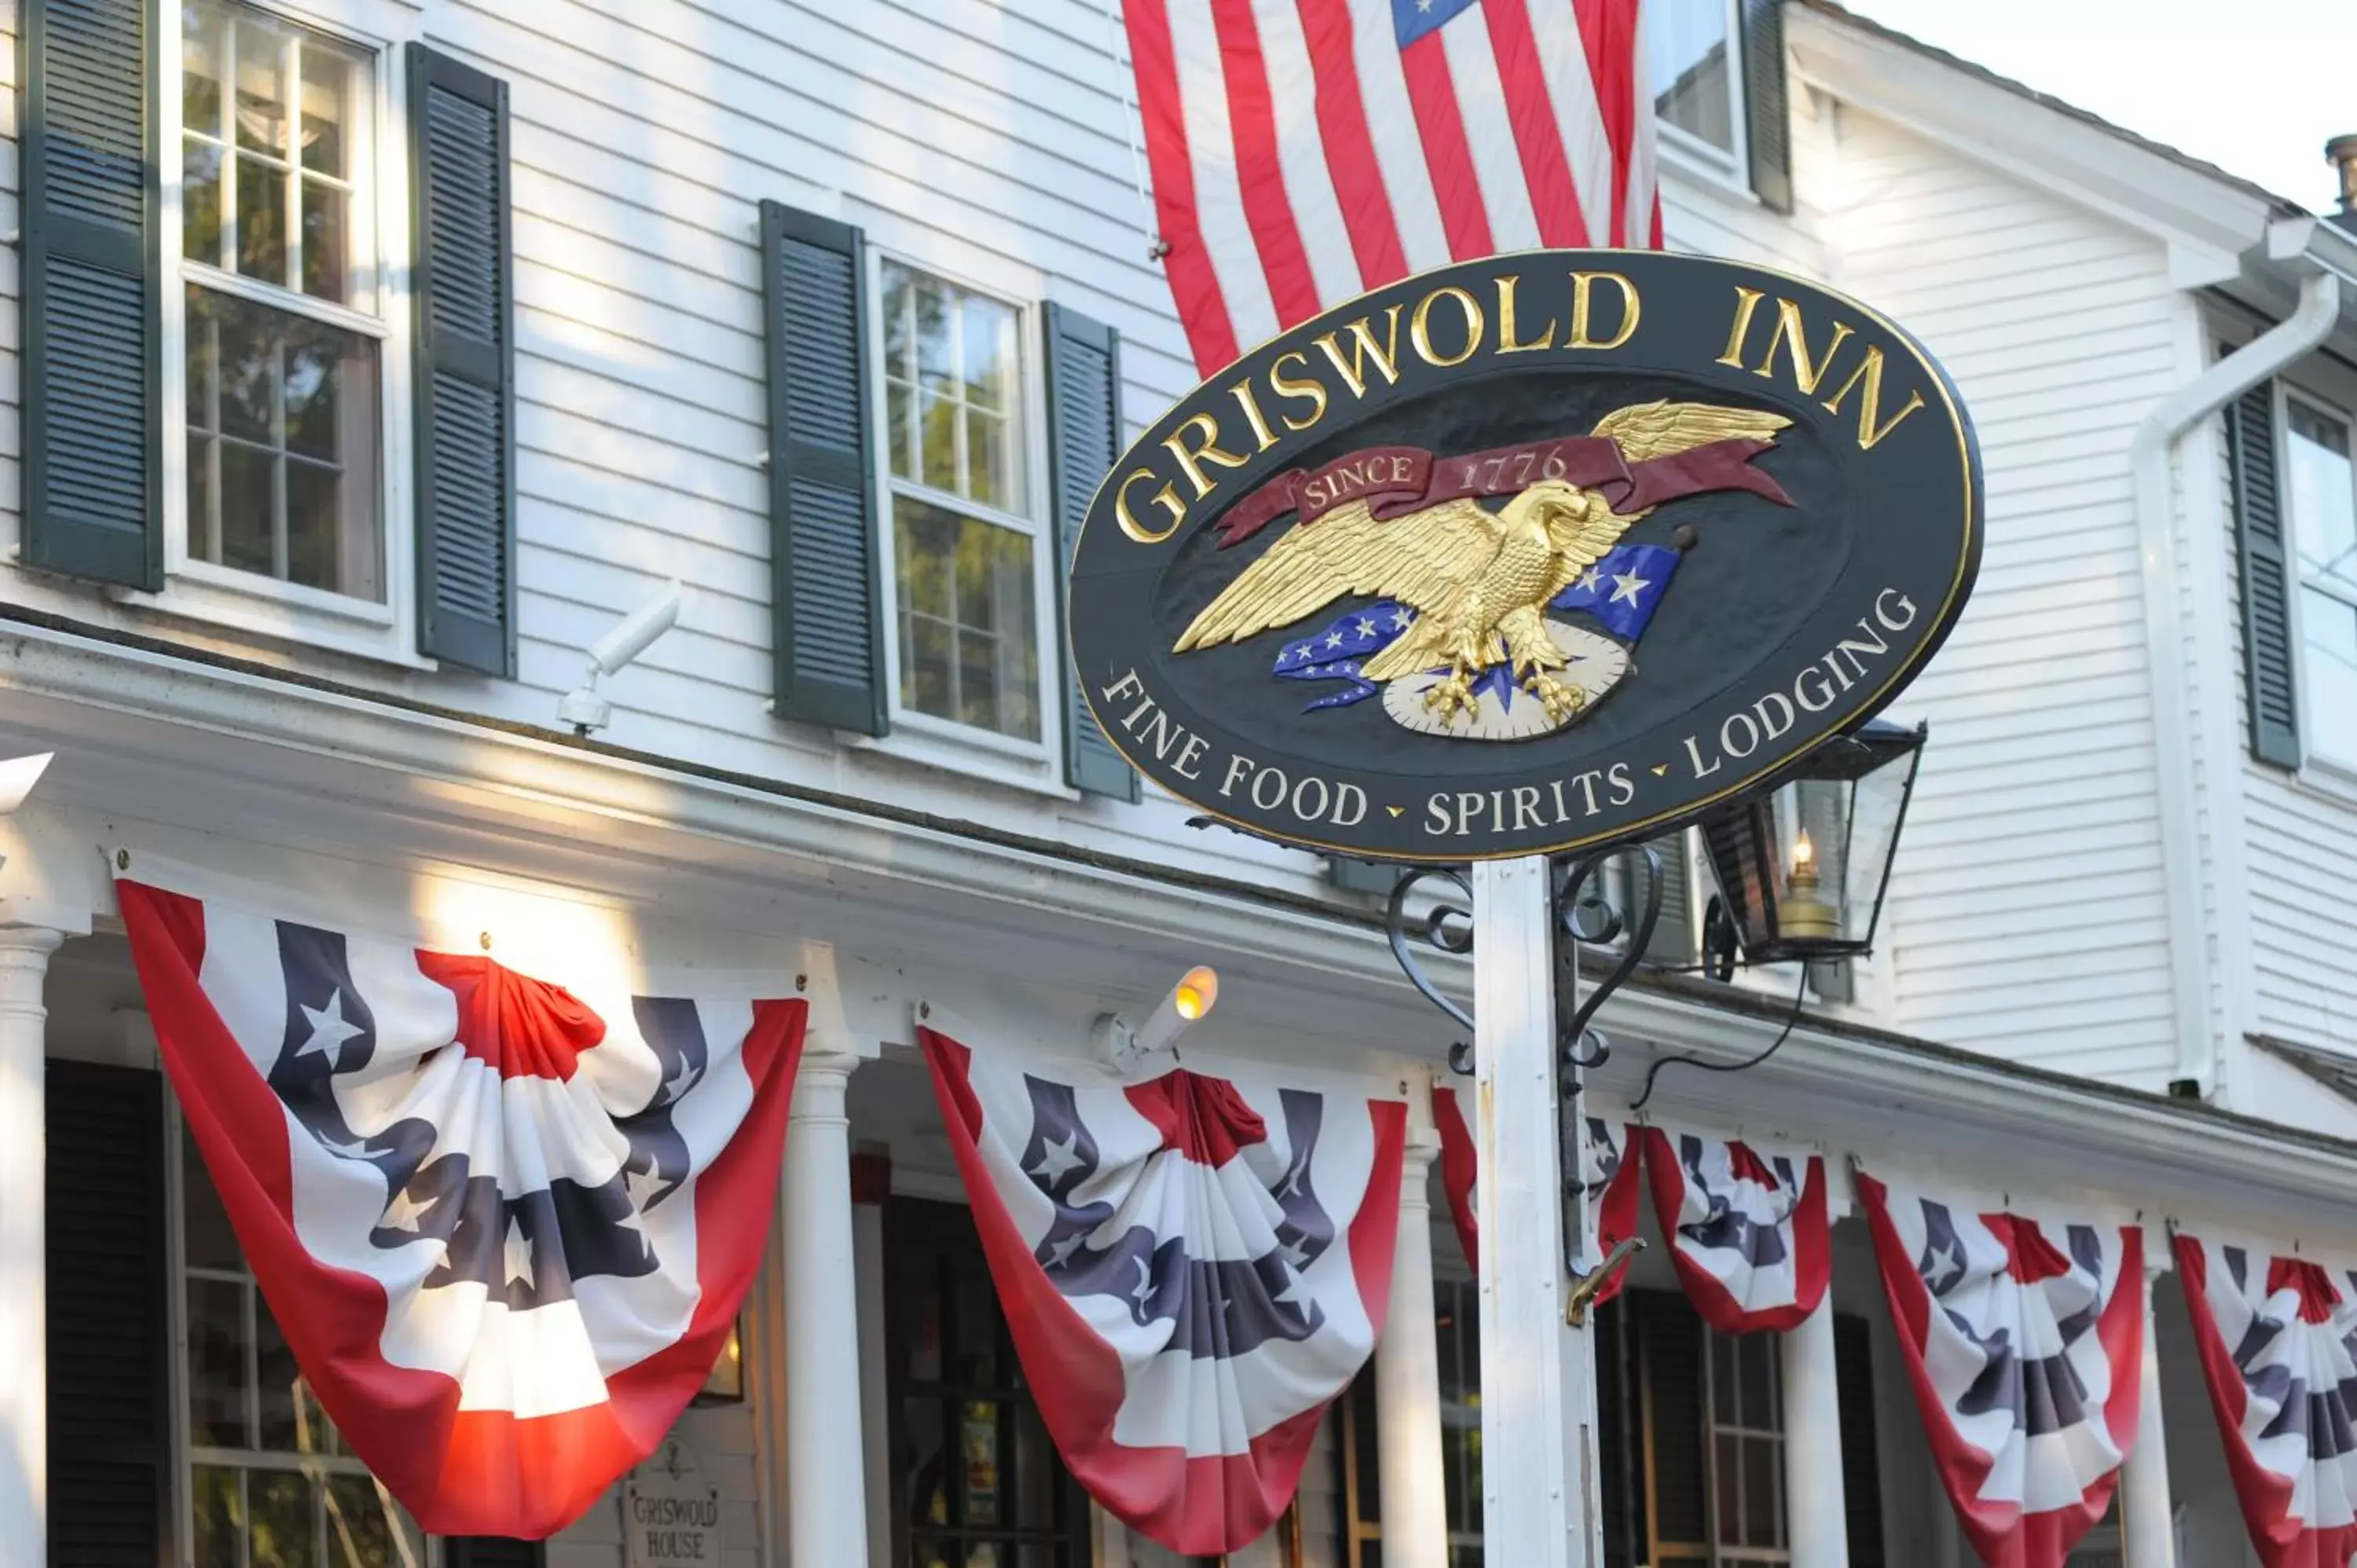 Facade/entrance in The Griswold Inn